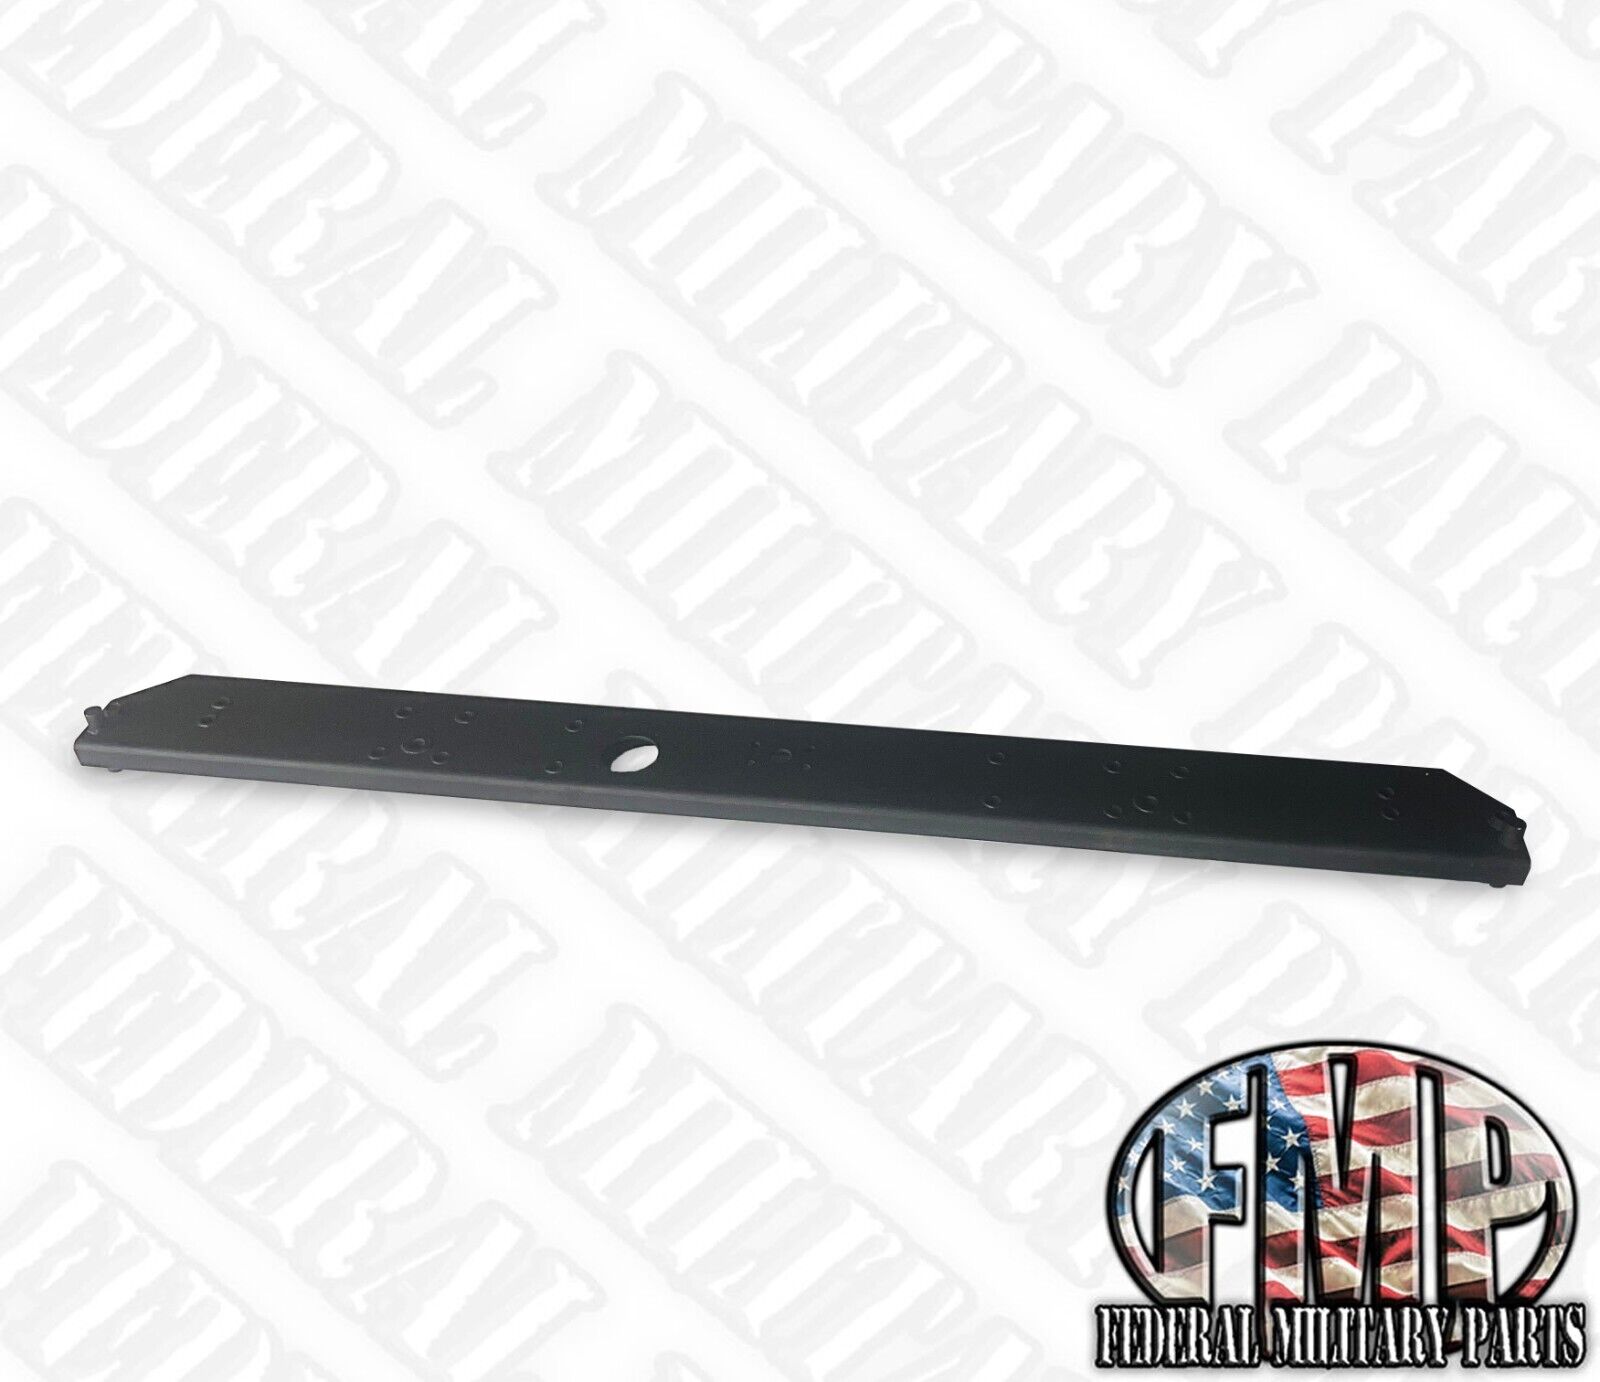 1 New Military  Airlift Rear Bumper fits Humvee M998 H1 Hummer